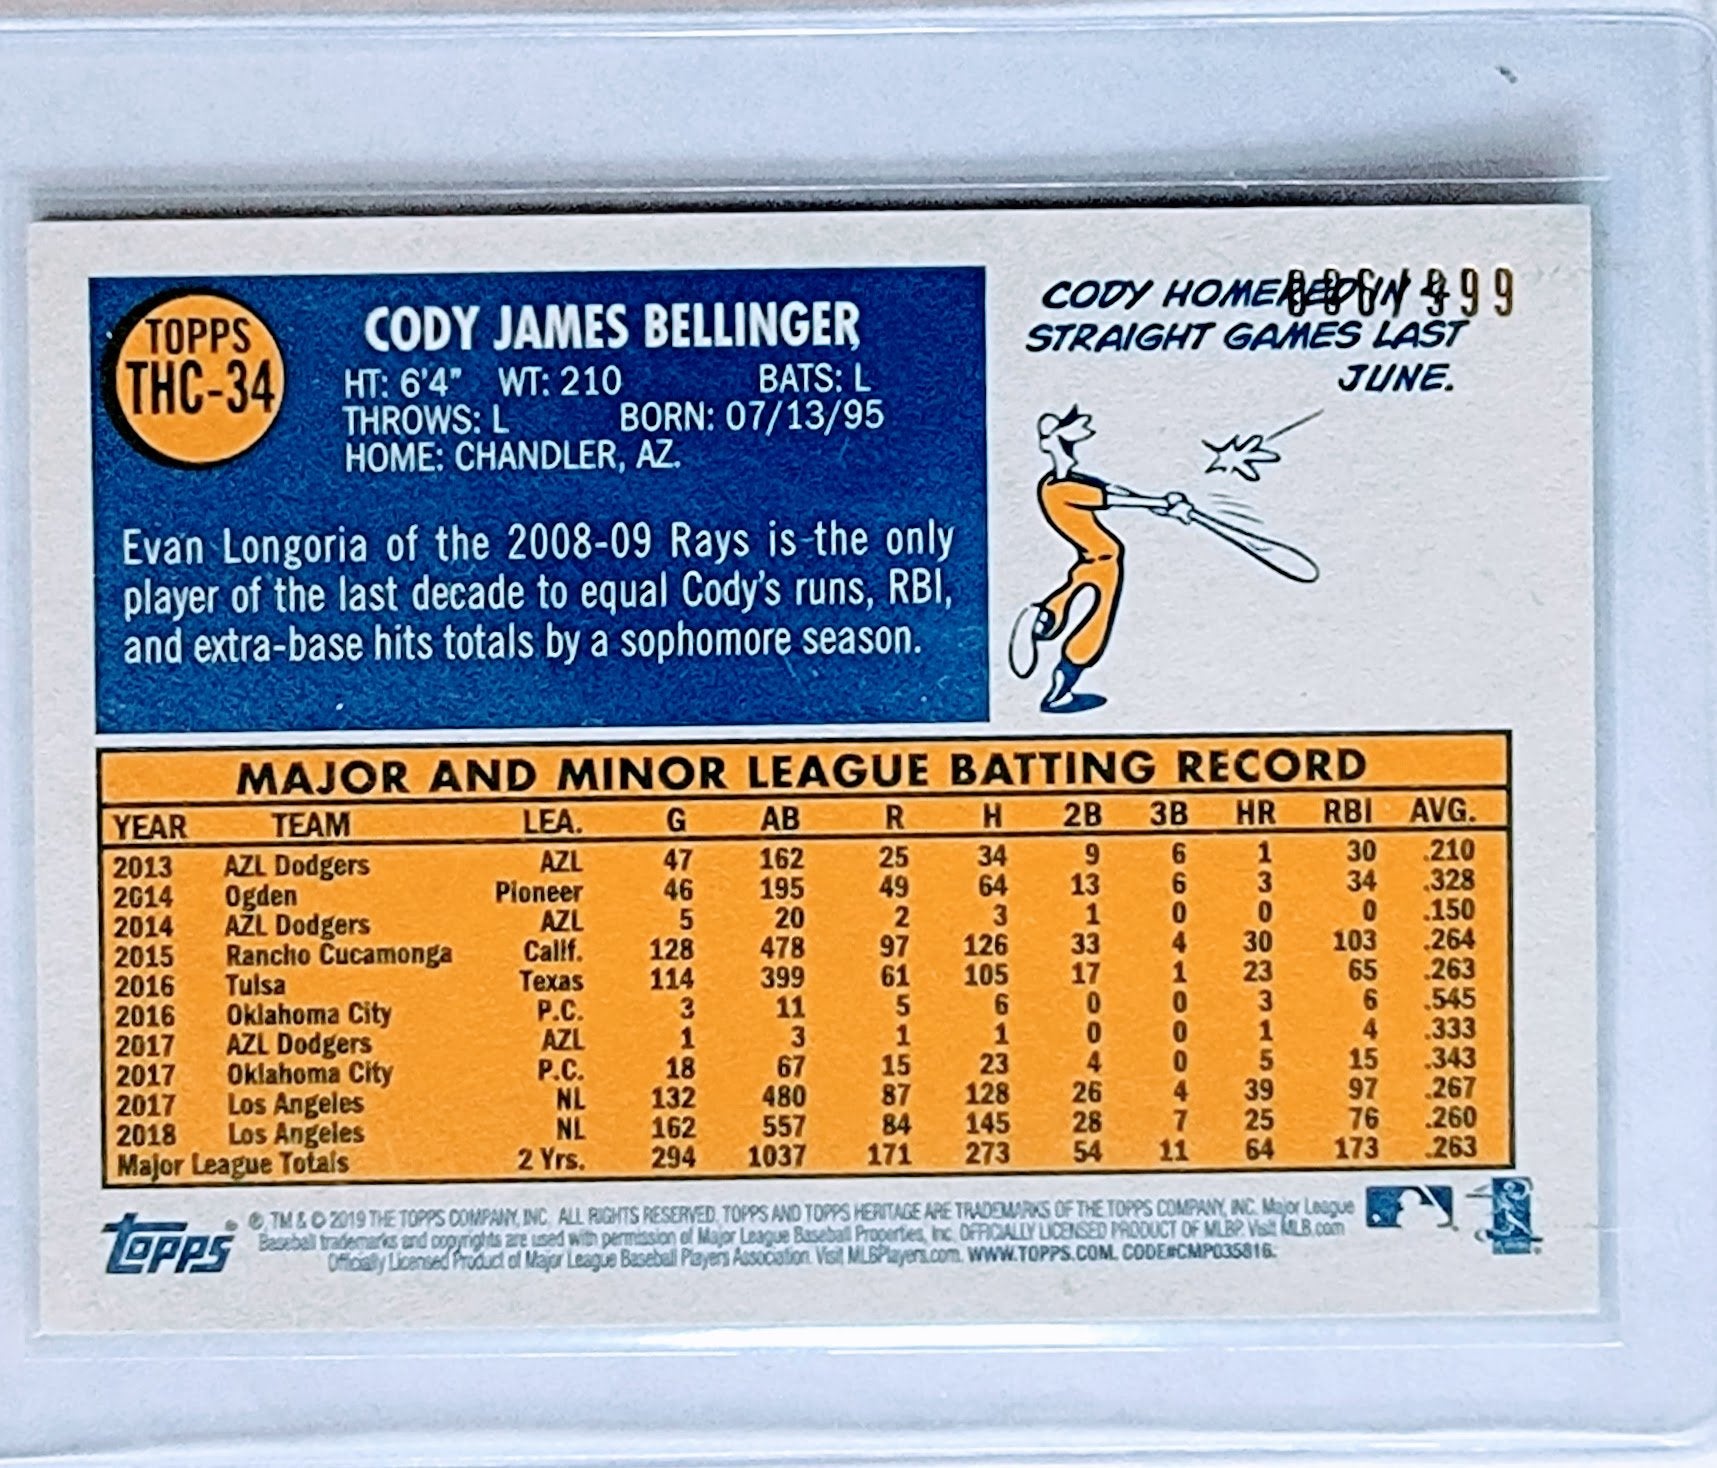 2019 Topps Heritage Cody Bellinger Chrome #'d/999 Baseball Trading Card TPTV simple Xclusive Collectibles   